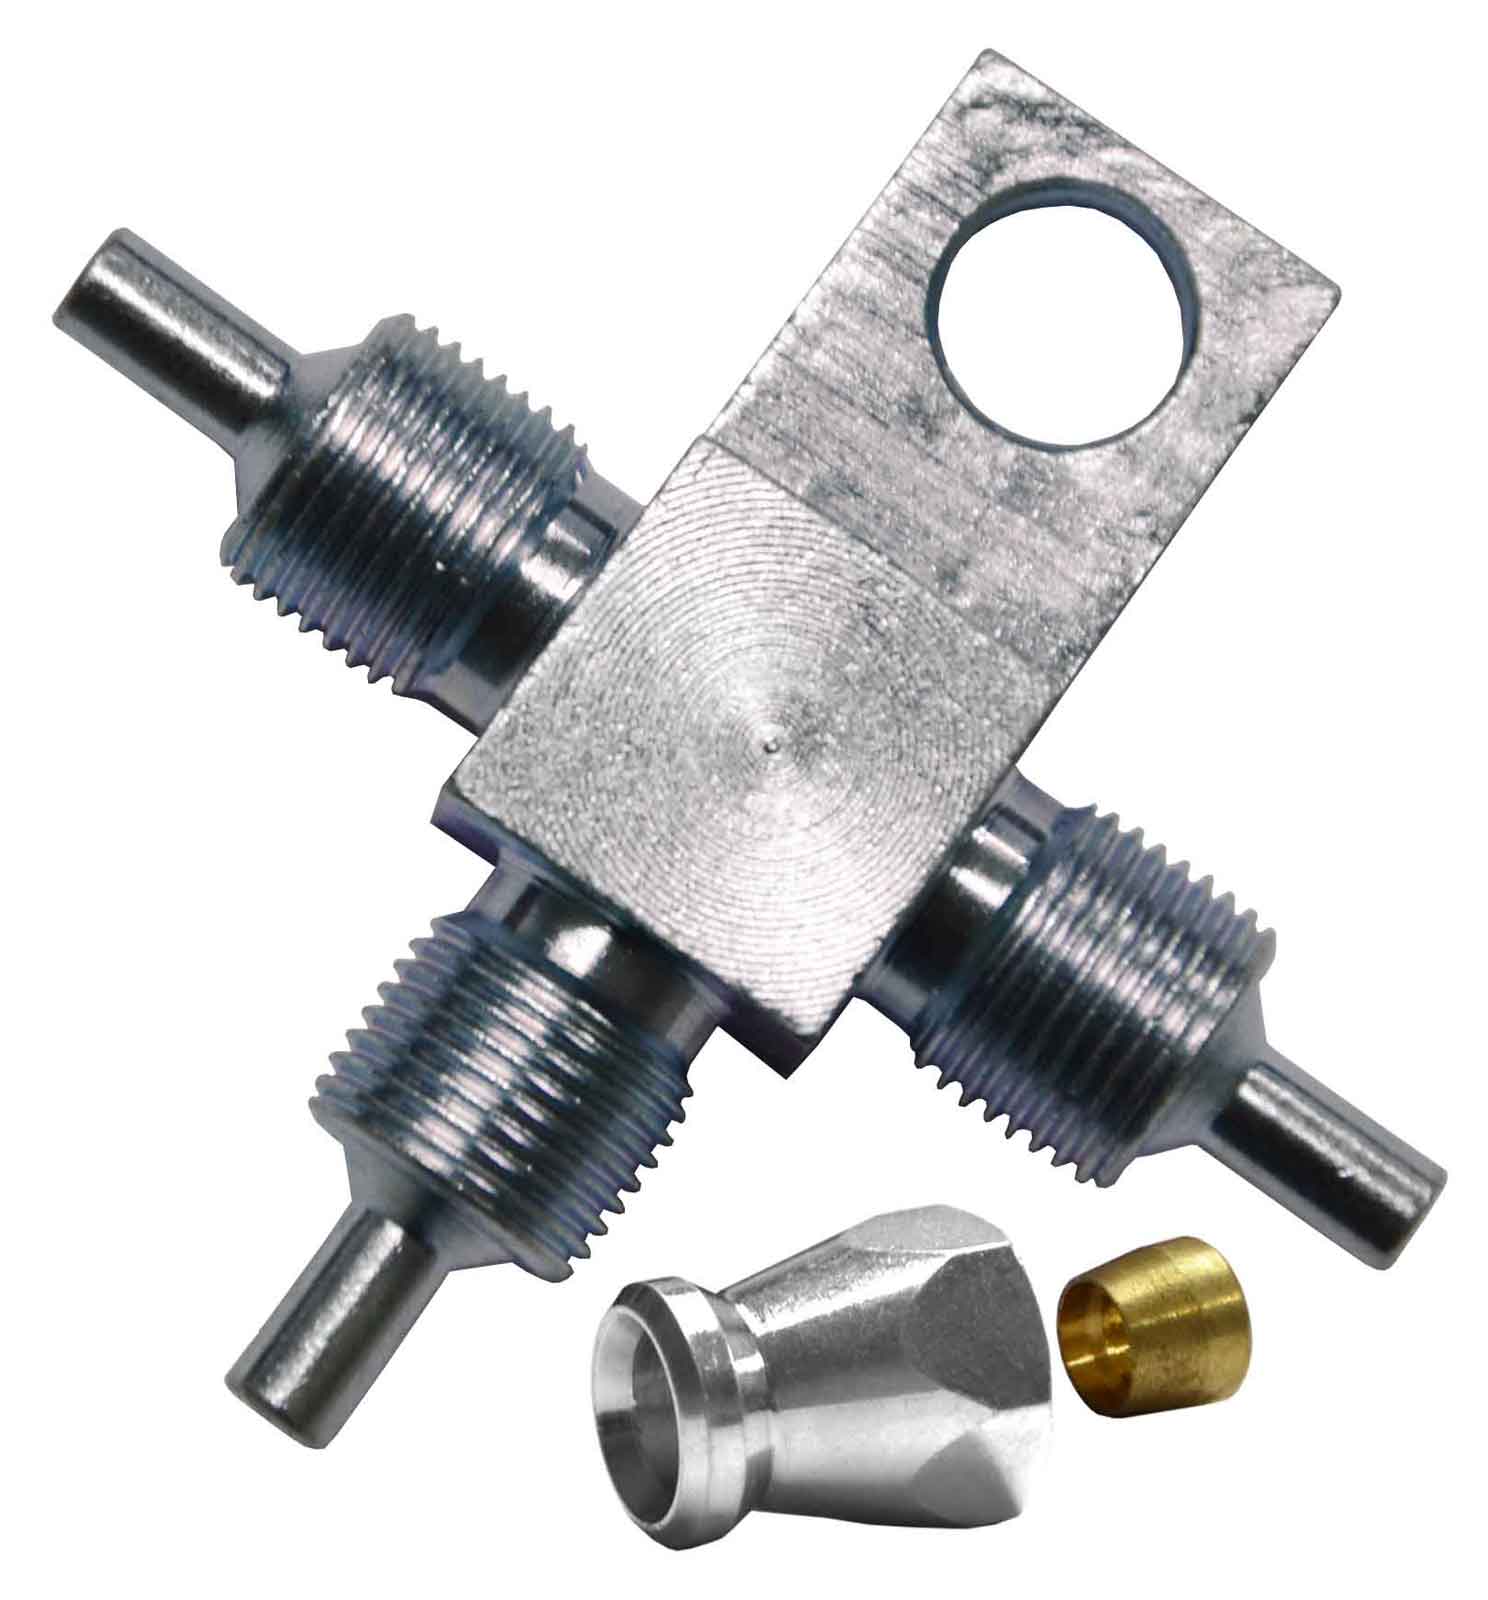 3-Way T-Piece for AN-3 (3mm) - Stainless Steel